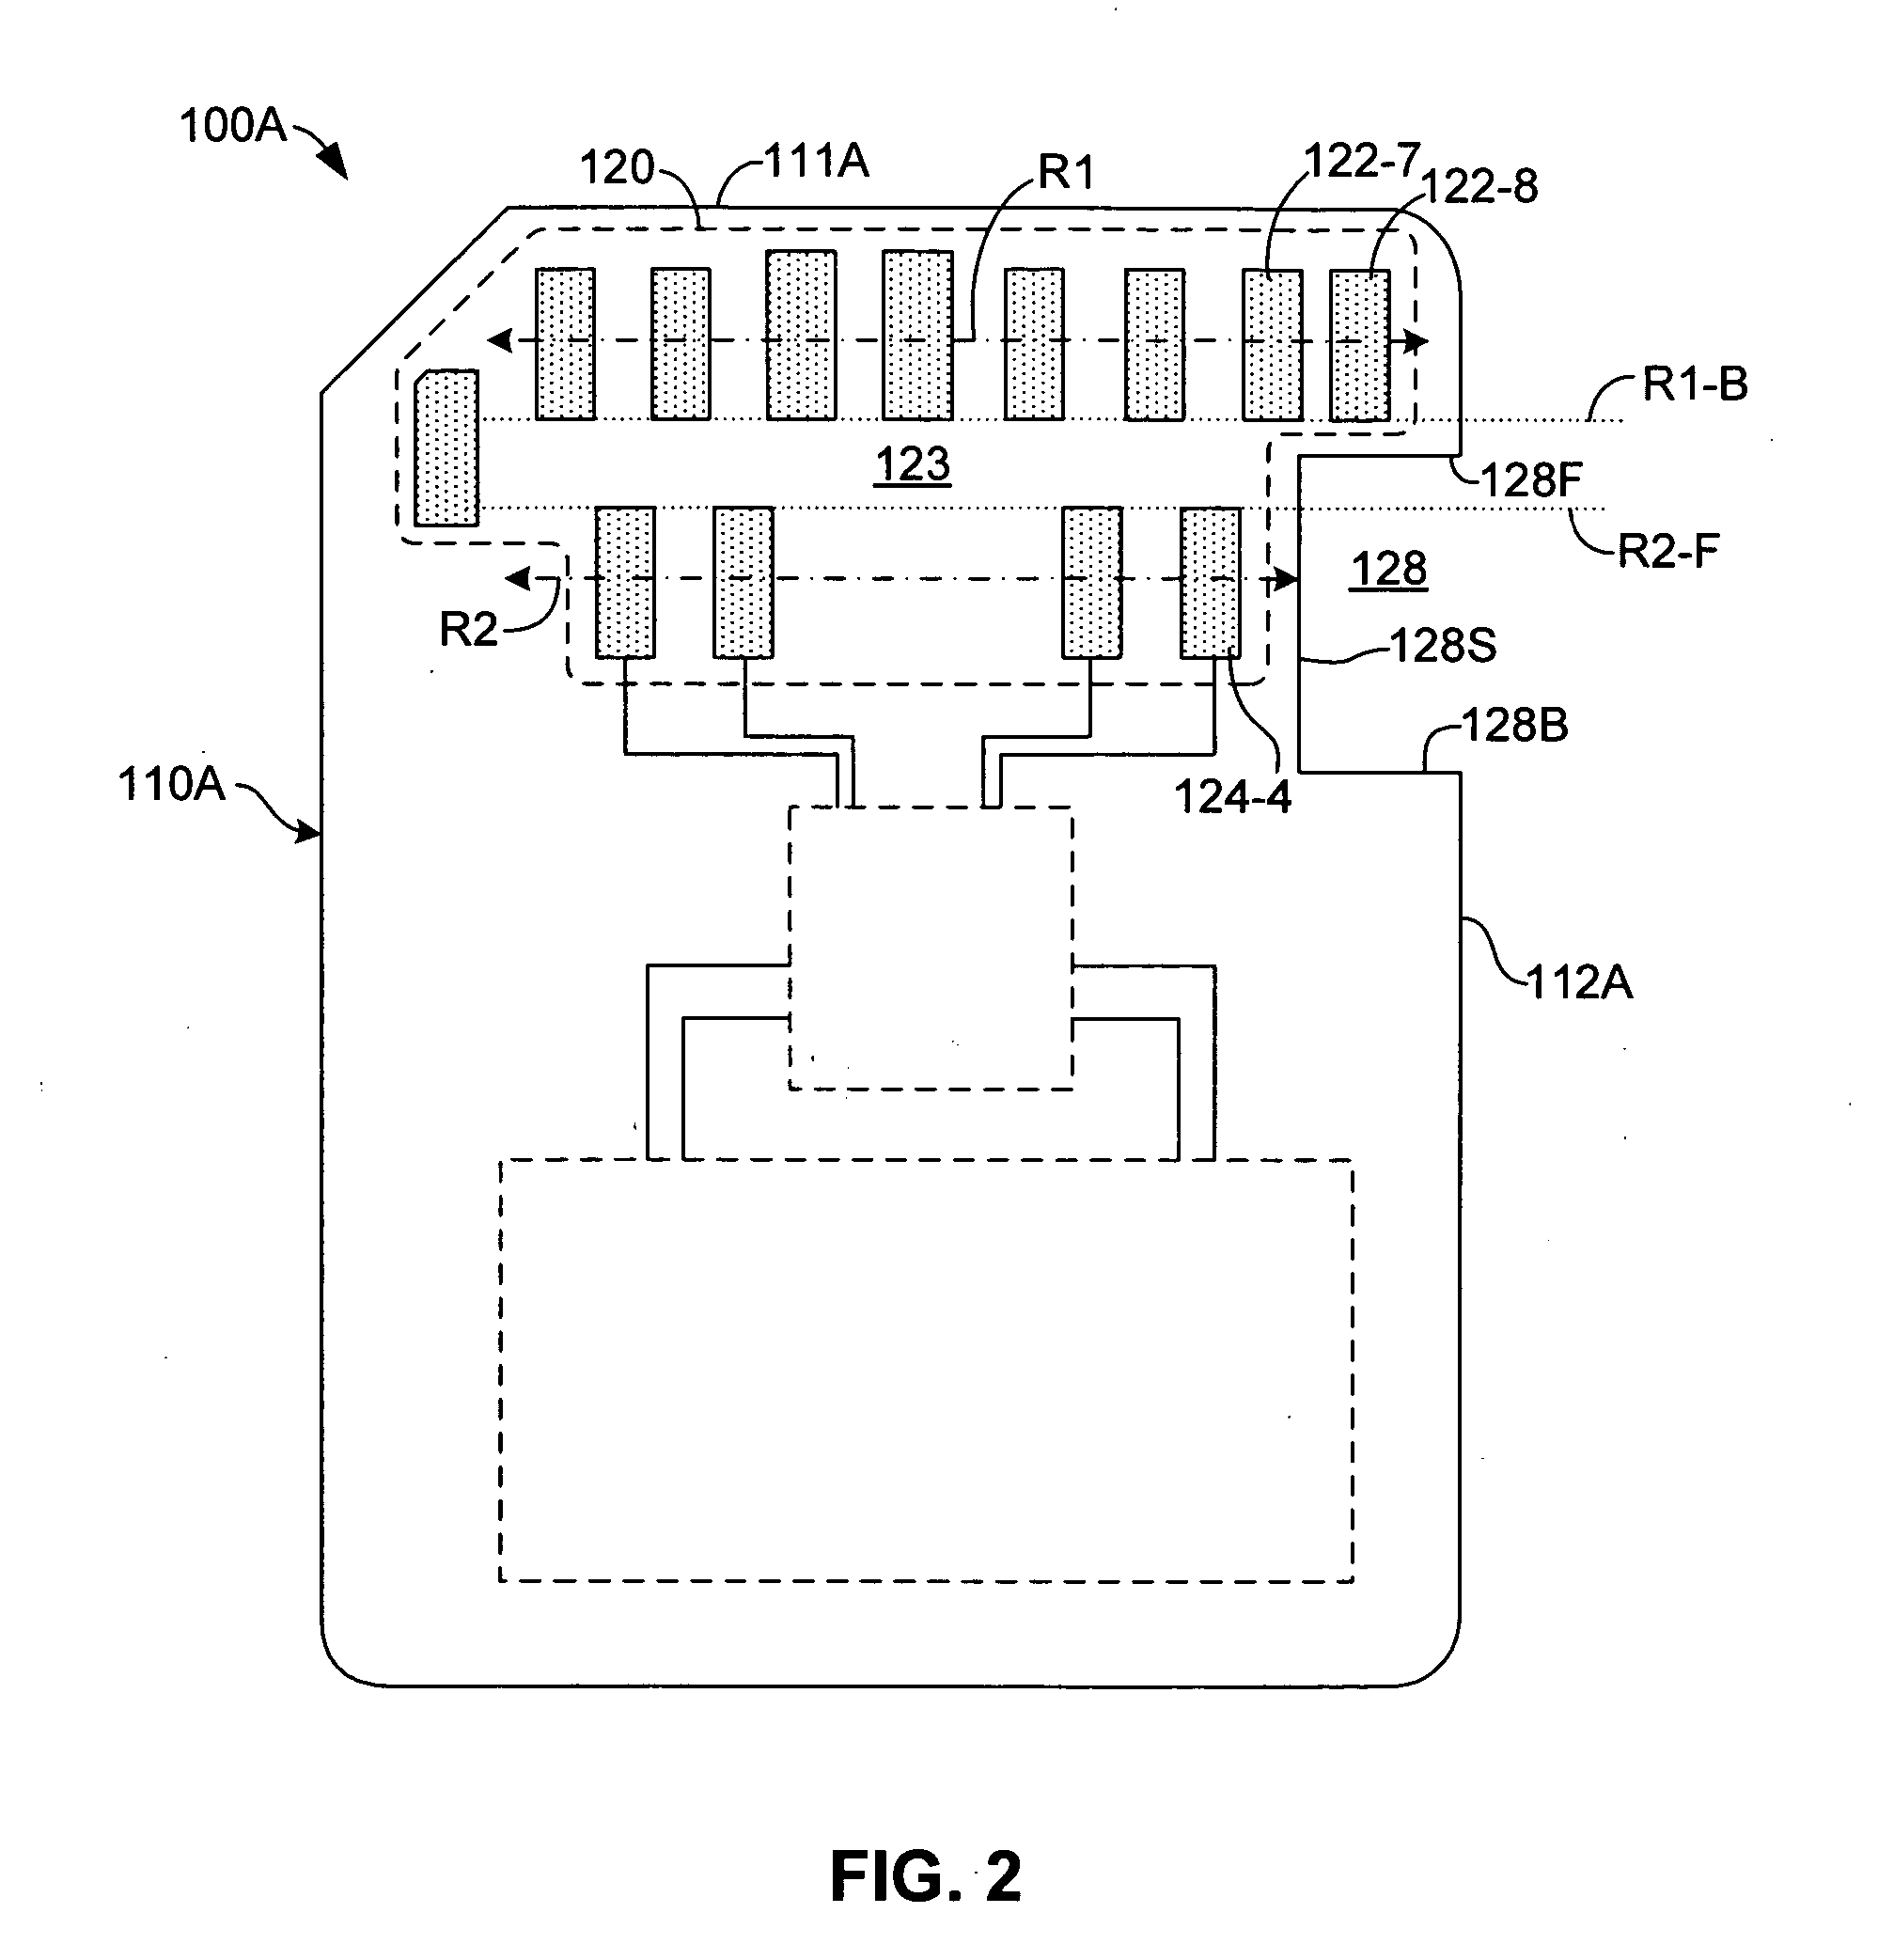 Contact pad arrangement for integrated SD/MMC system